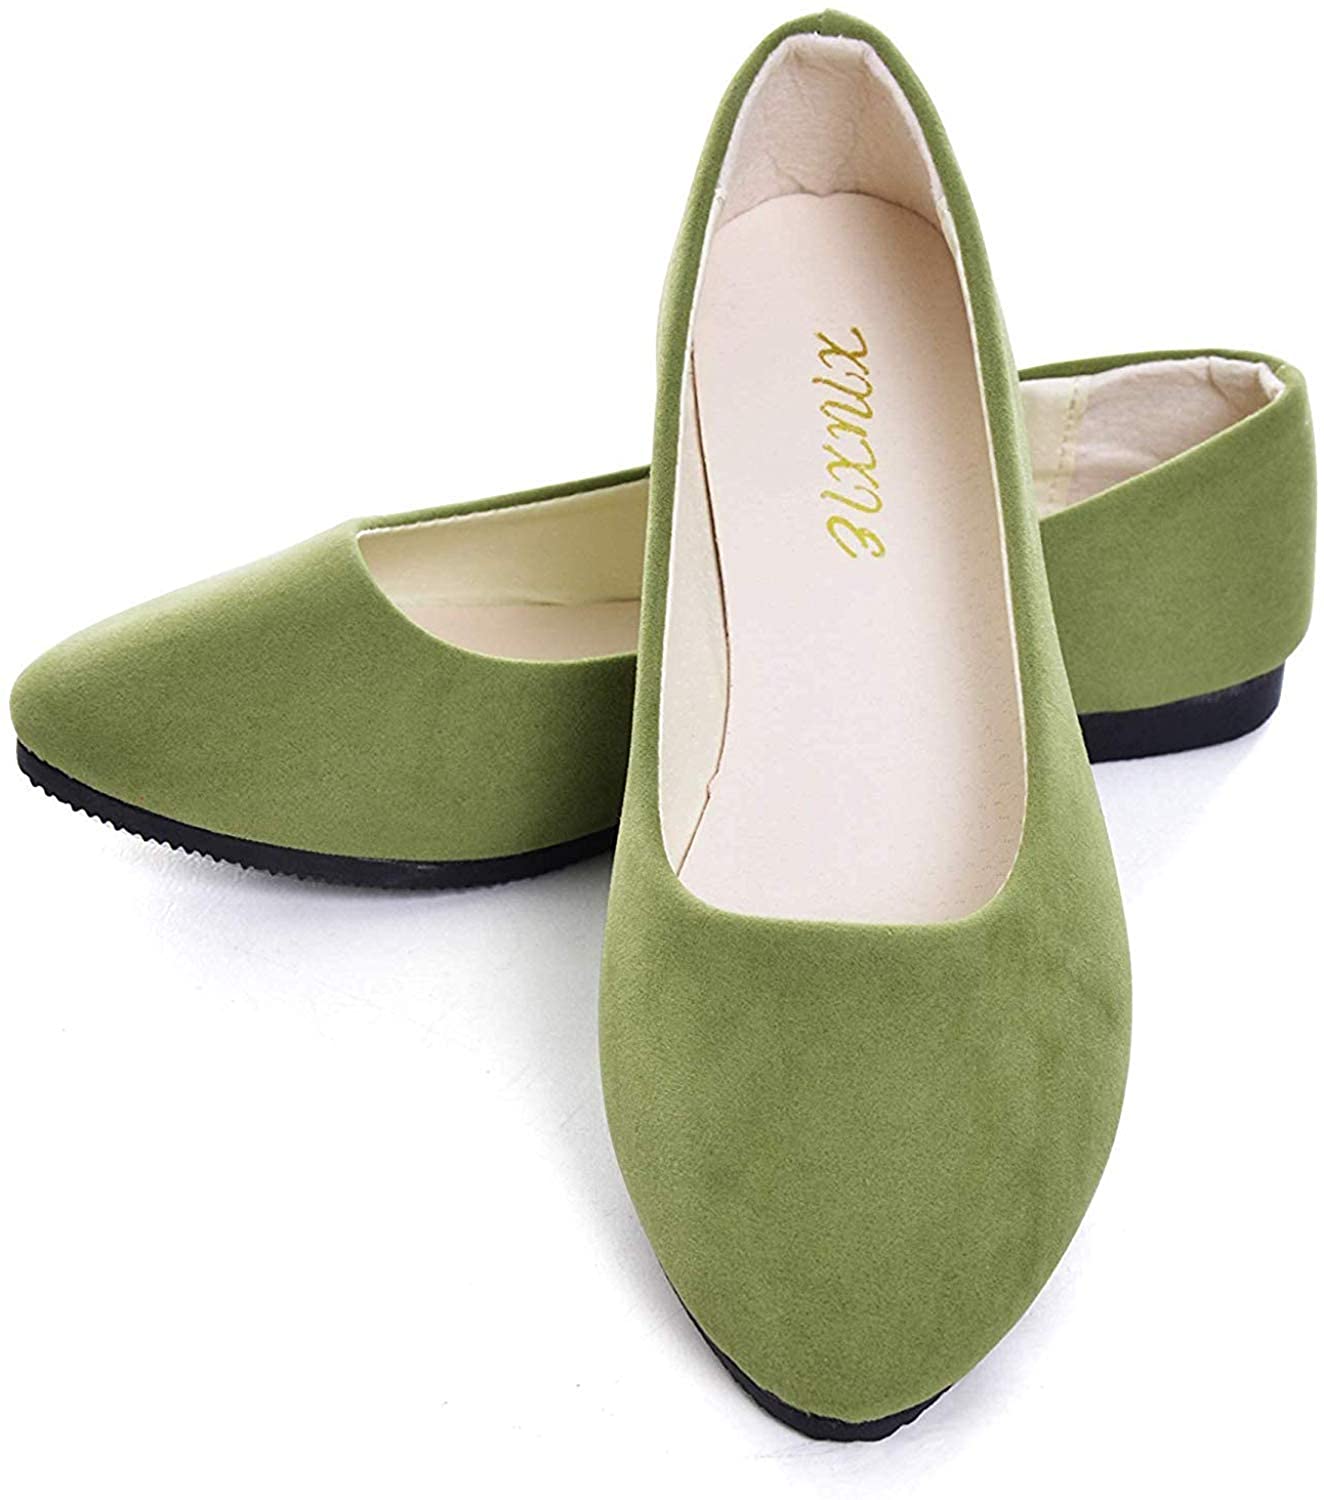 Shoes Womens Shoes Slip Ons Pointed Toe Flats Ladies flats 